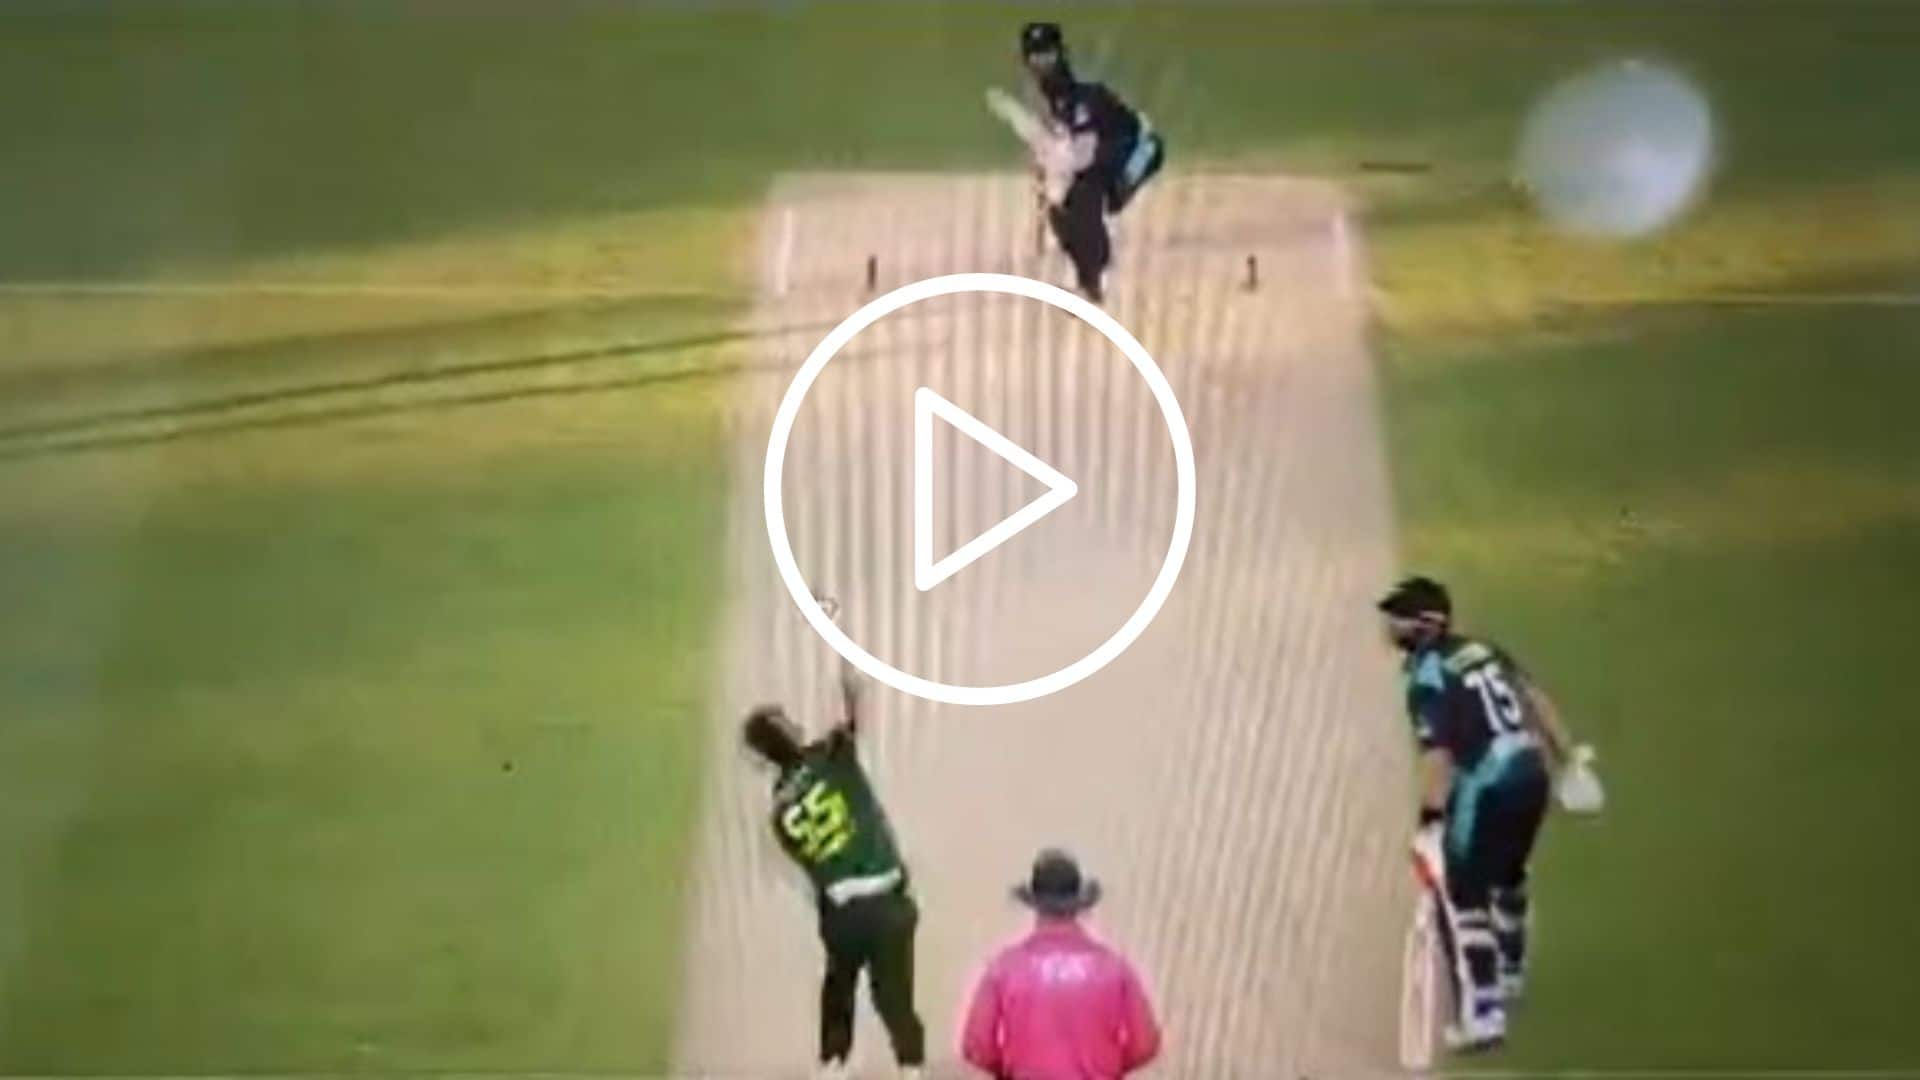 [Watch] Kane Williamson's 'Classy Drive' Leads To His Downfall vs PAK